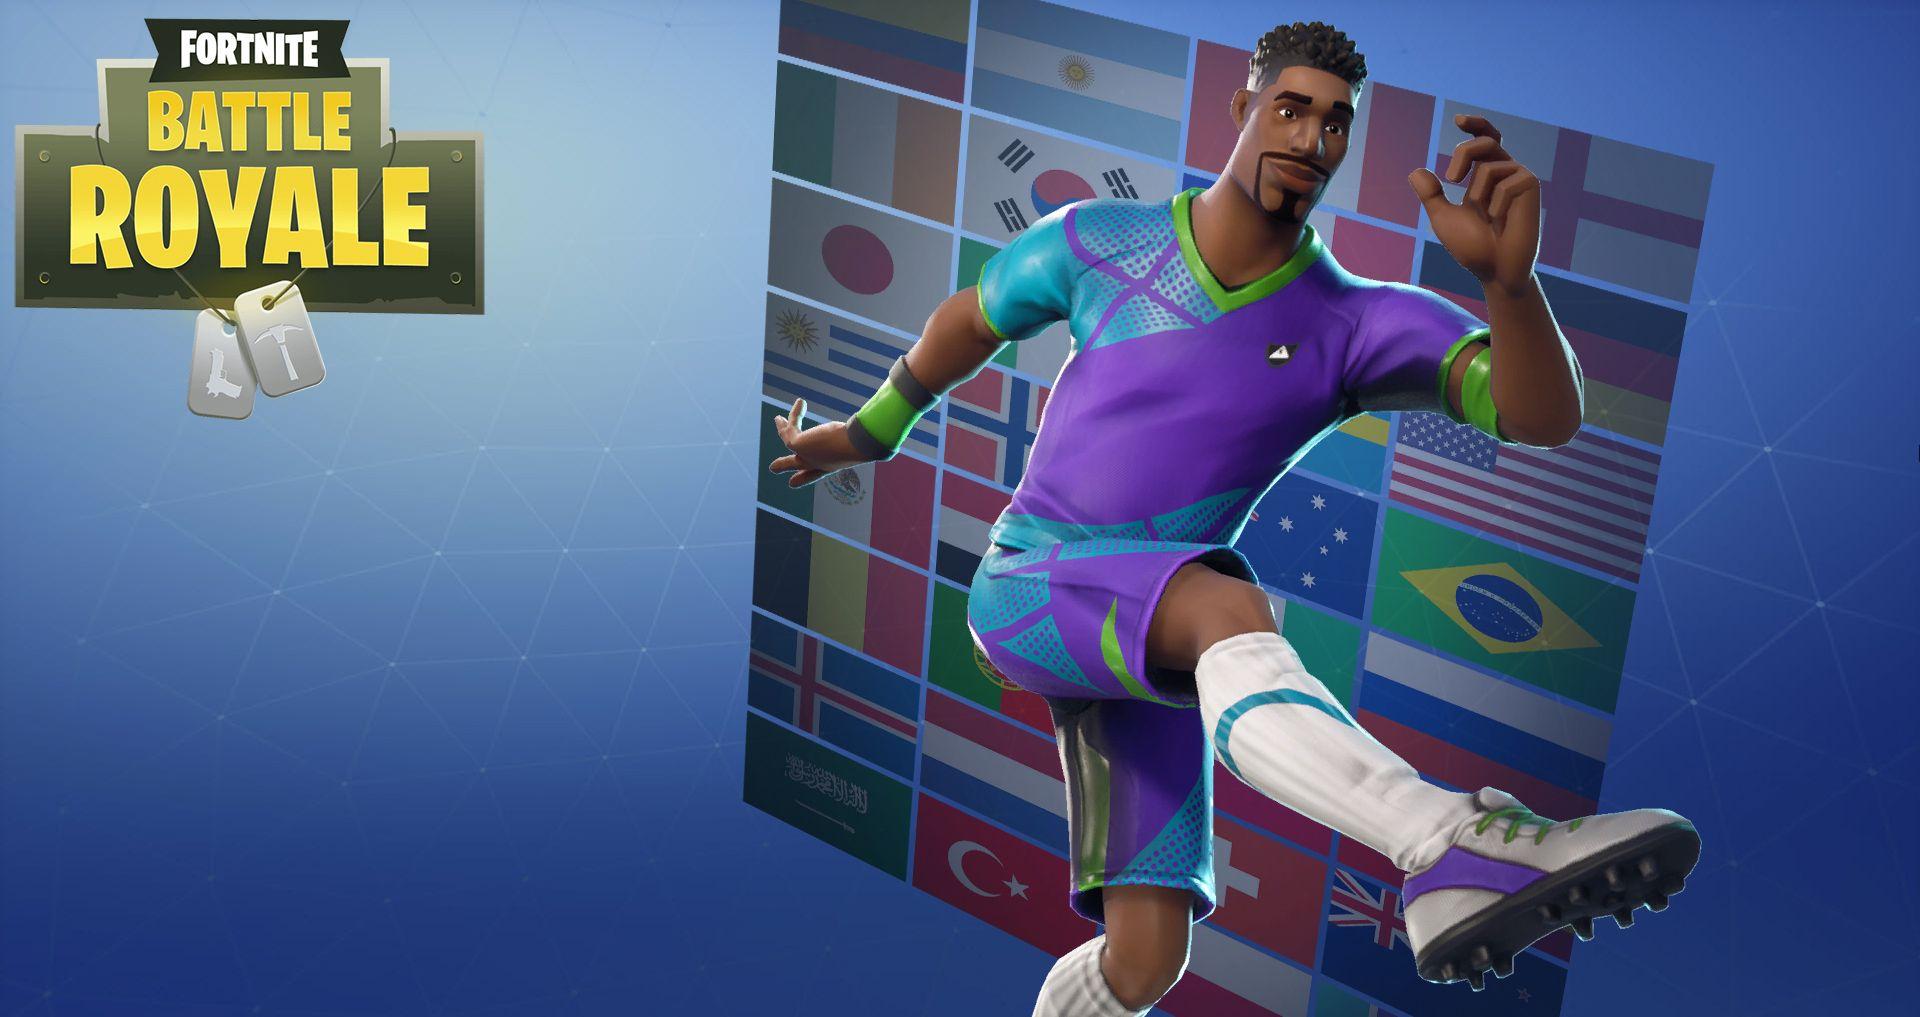 Super Striker Fortnite Outfit Skin How to Get + News